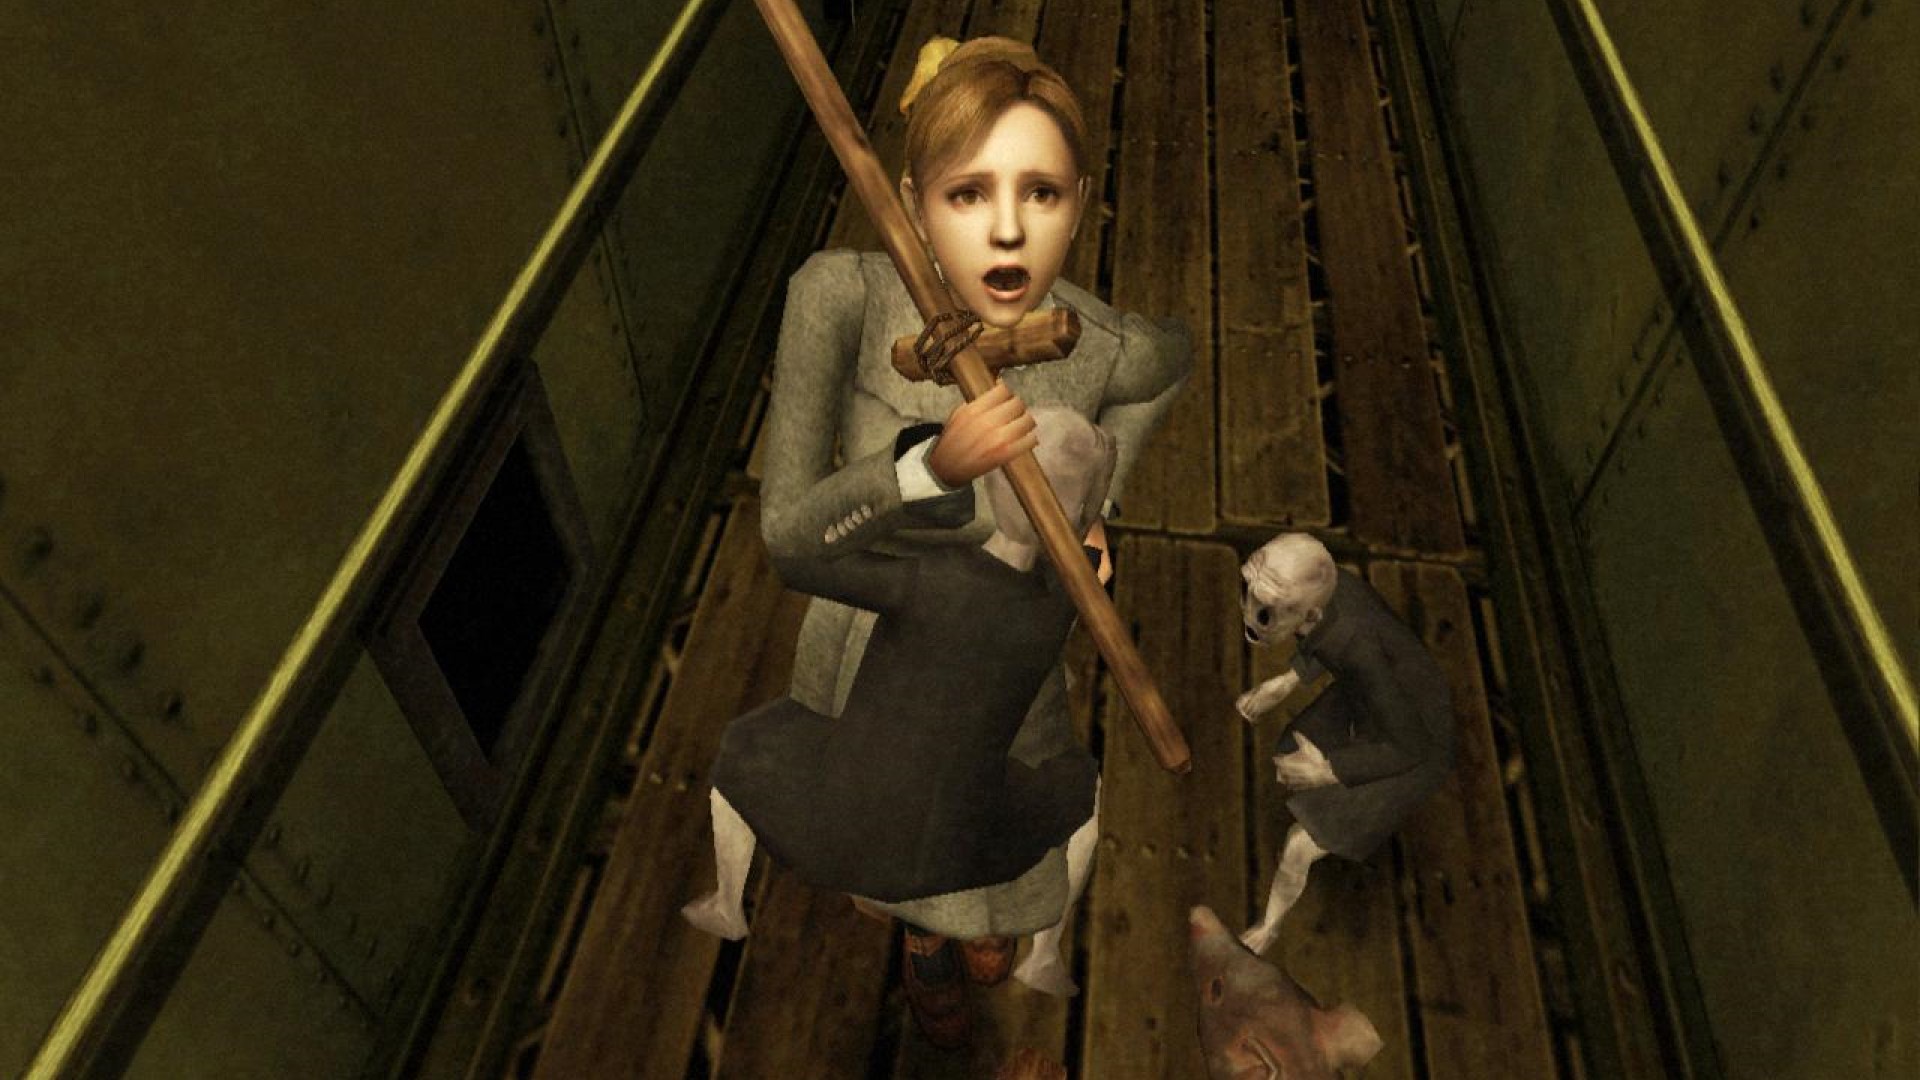 Rule of rose controversial scene - nzhoure